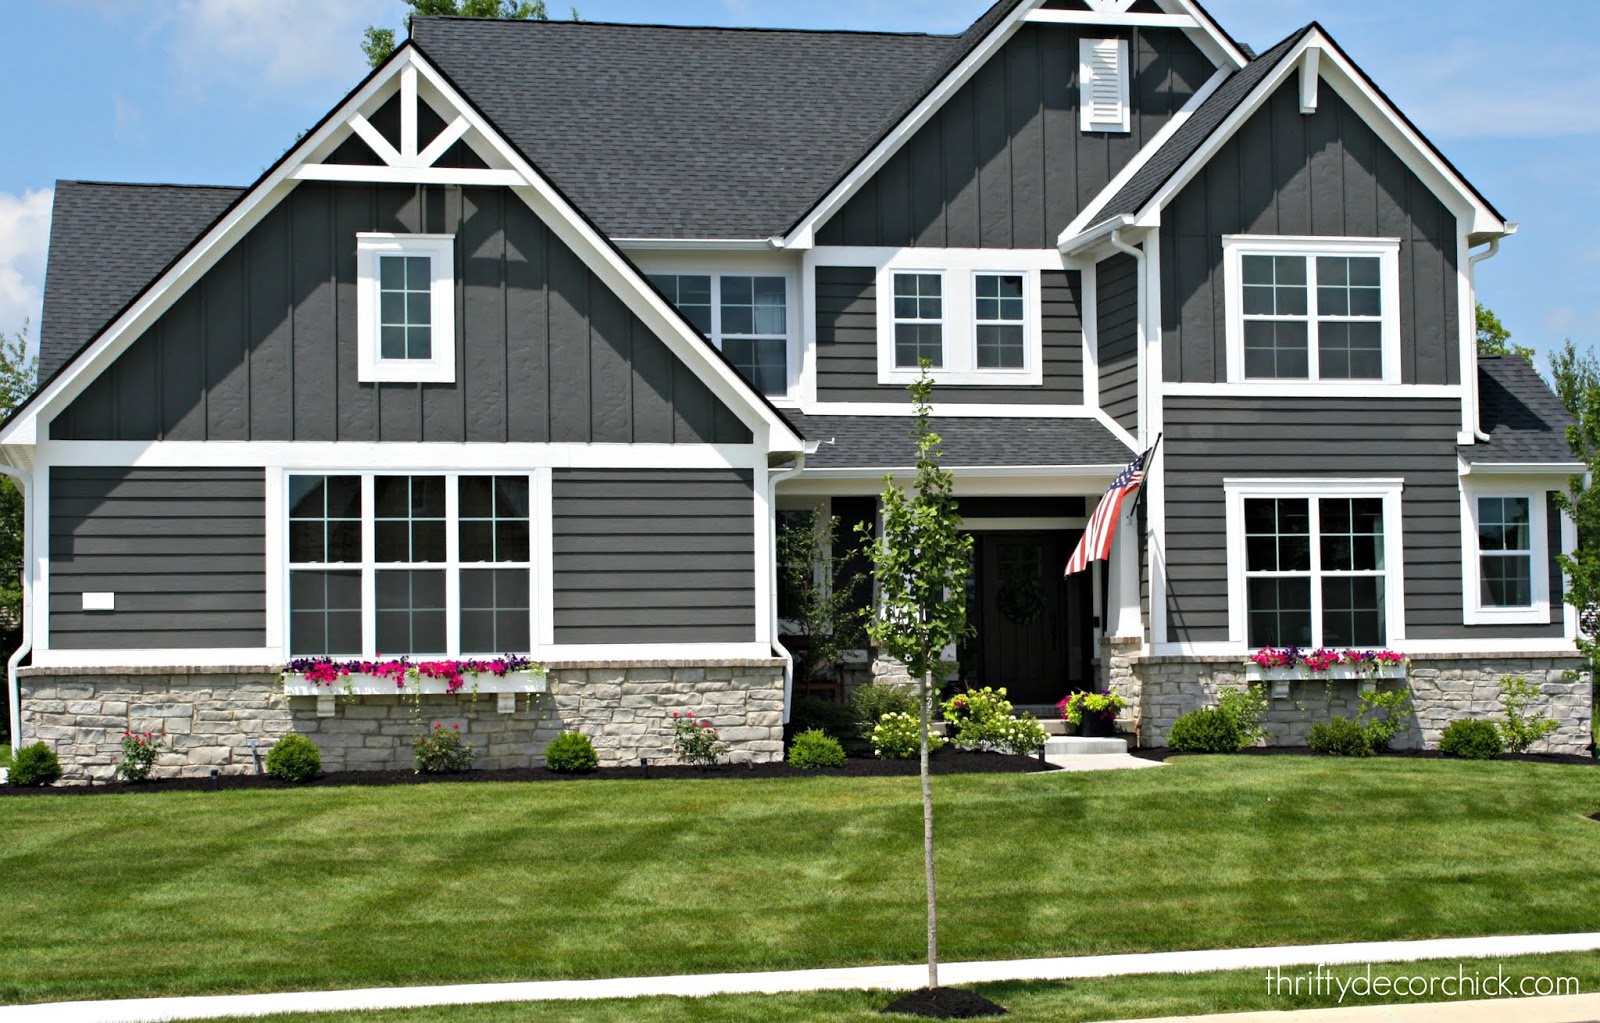 Dark gray Craftsman style home with gray paint white trim